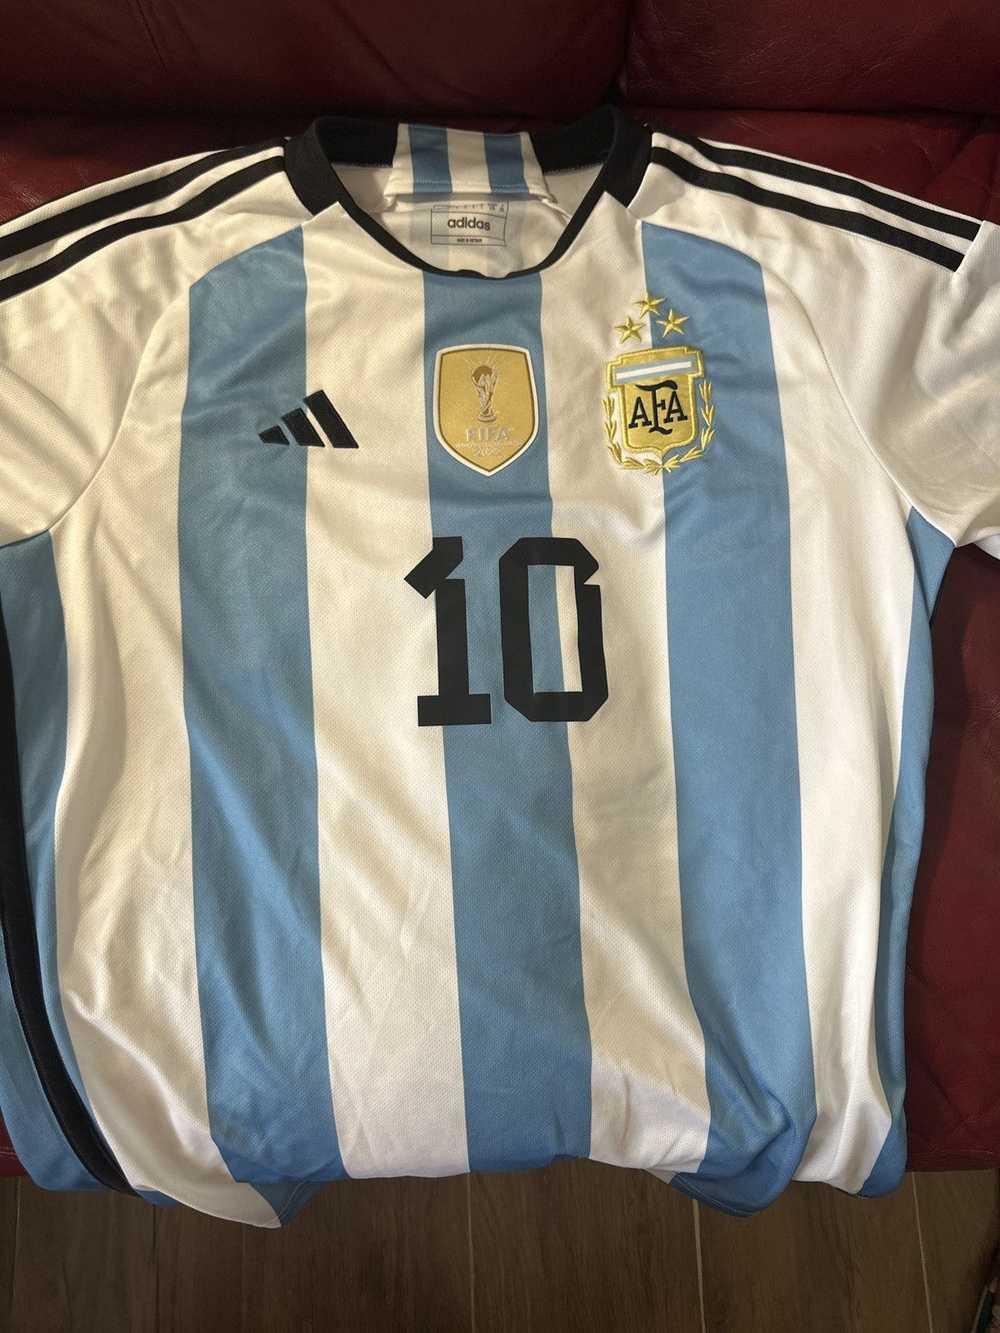 Adidas Argentina Messi 3x World Cup Jersey - image 4